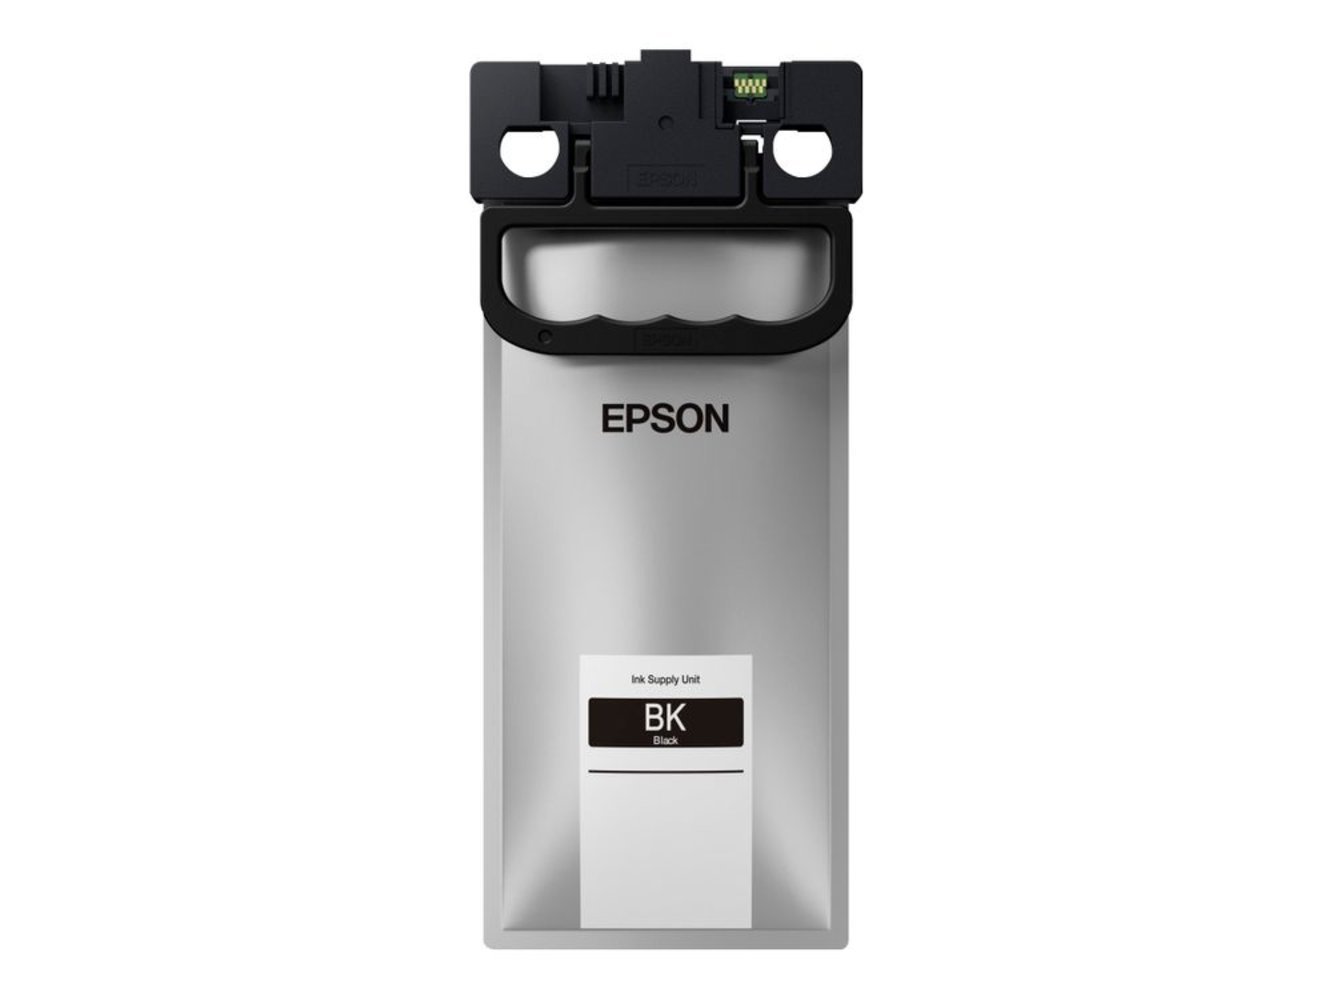 EPSON WF-C5x90 Series Ink Cartridge XXL Black 10000s Applies to only 90 end models